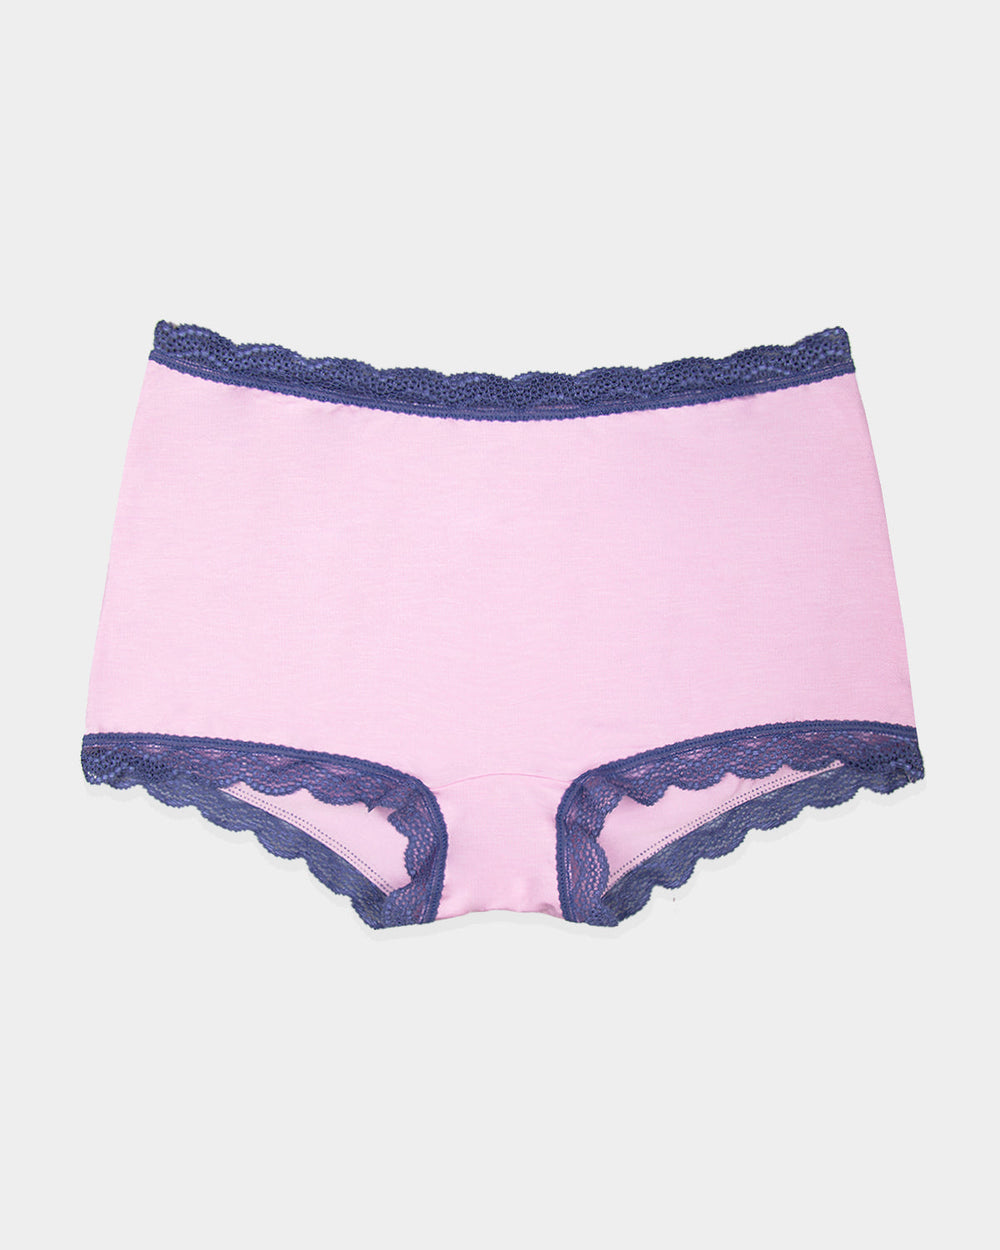 Hipster Brief - Pirouette and Indigo